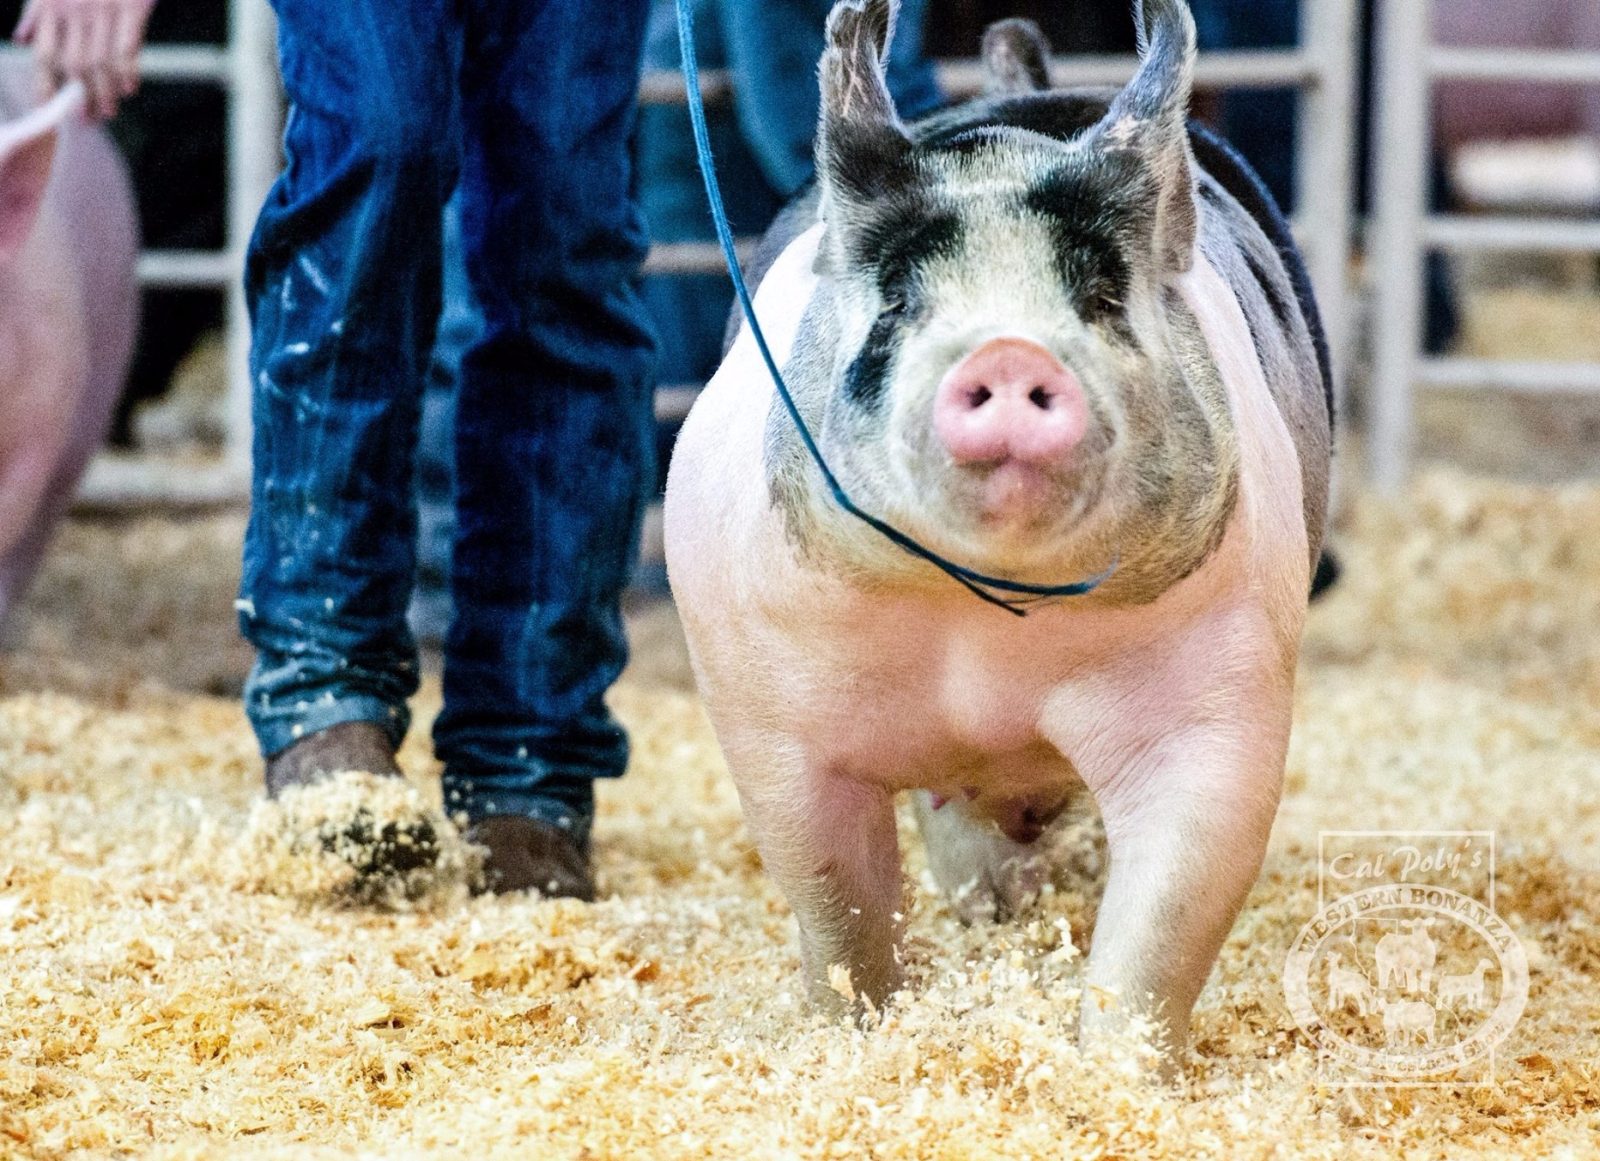 Pig at Paso Robles Event Center